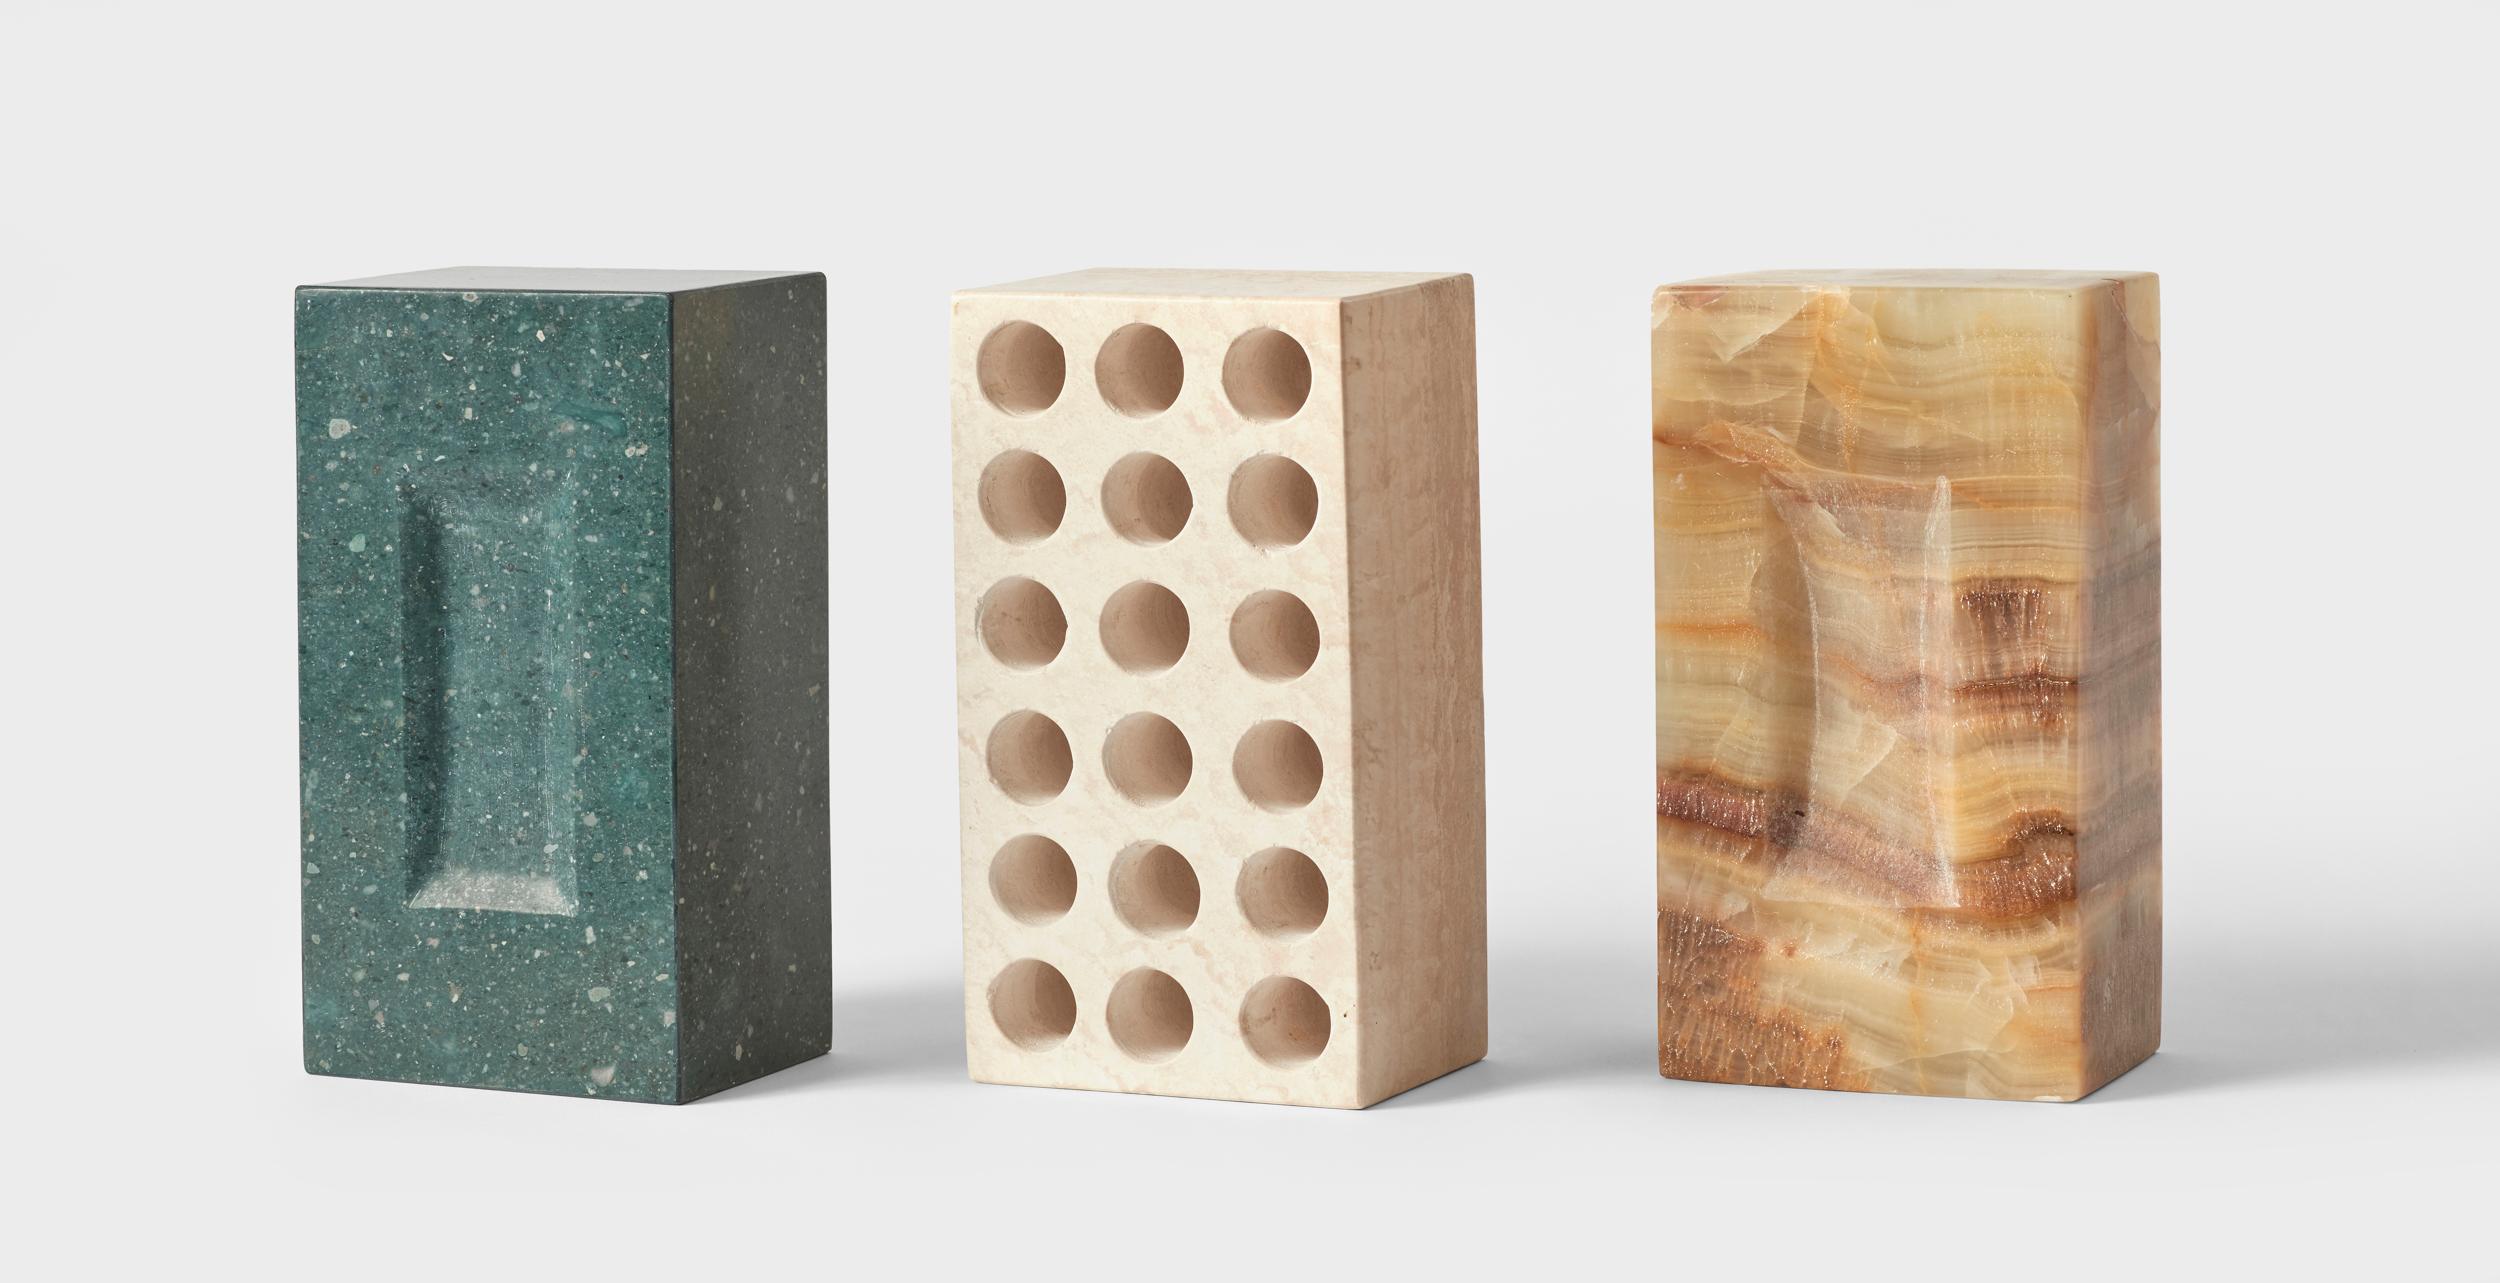 Set Of 3 BRICKS by Estudio Rafael Freyre
Dimensions: W 12.5 D 9 x H 23 cm 
Materials: Andes Stones
Also Available: Other finishes available,

The brick is a generic constructive element that constitutes part of the urban imaginary. In Peru,